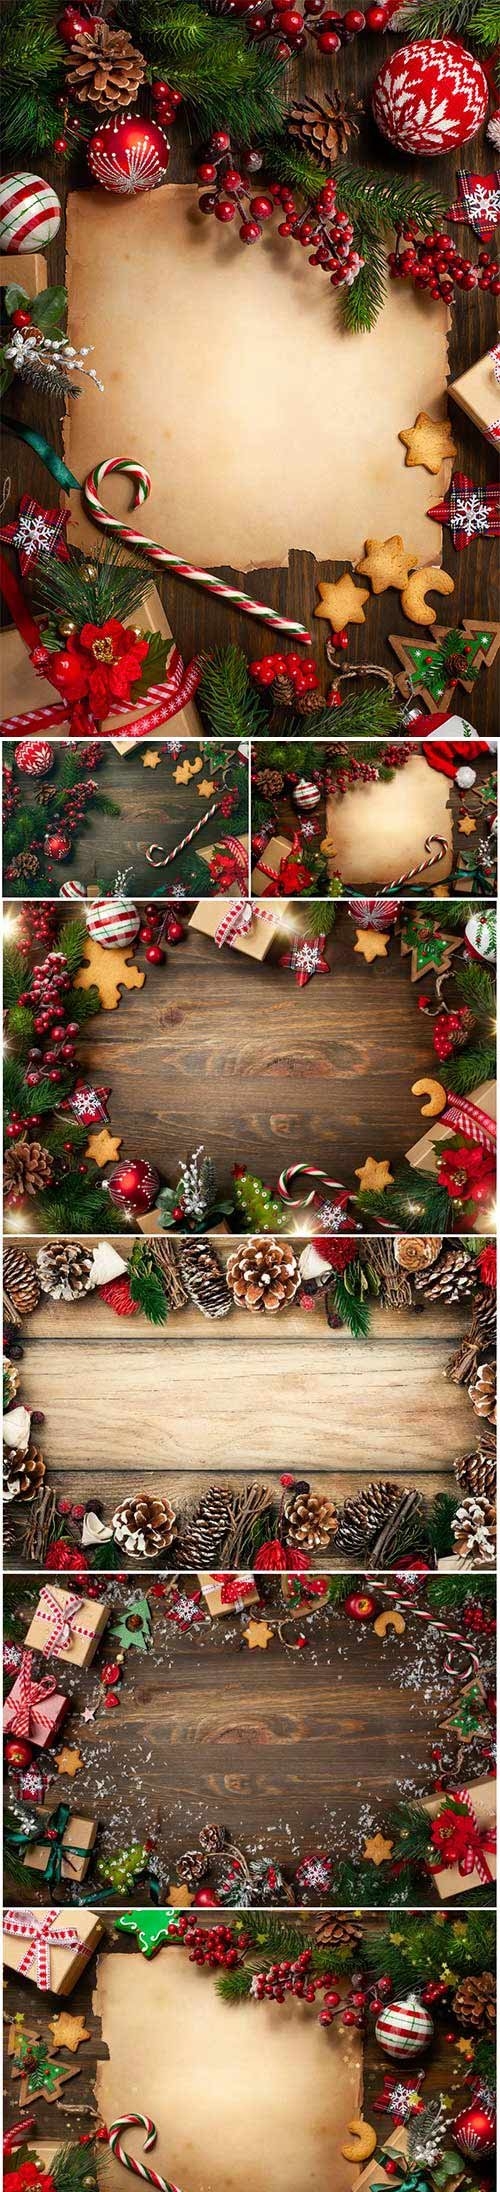 New Year and Christmas stock photos 86